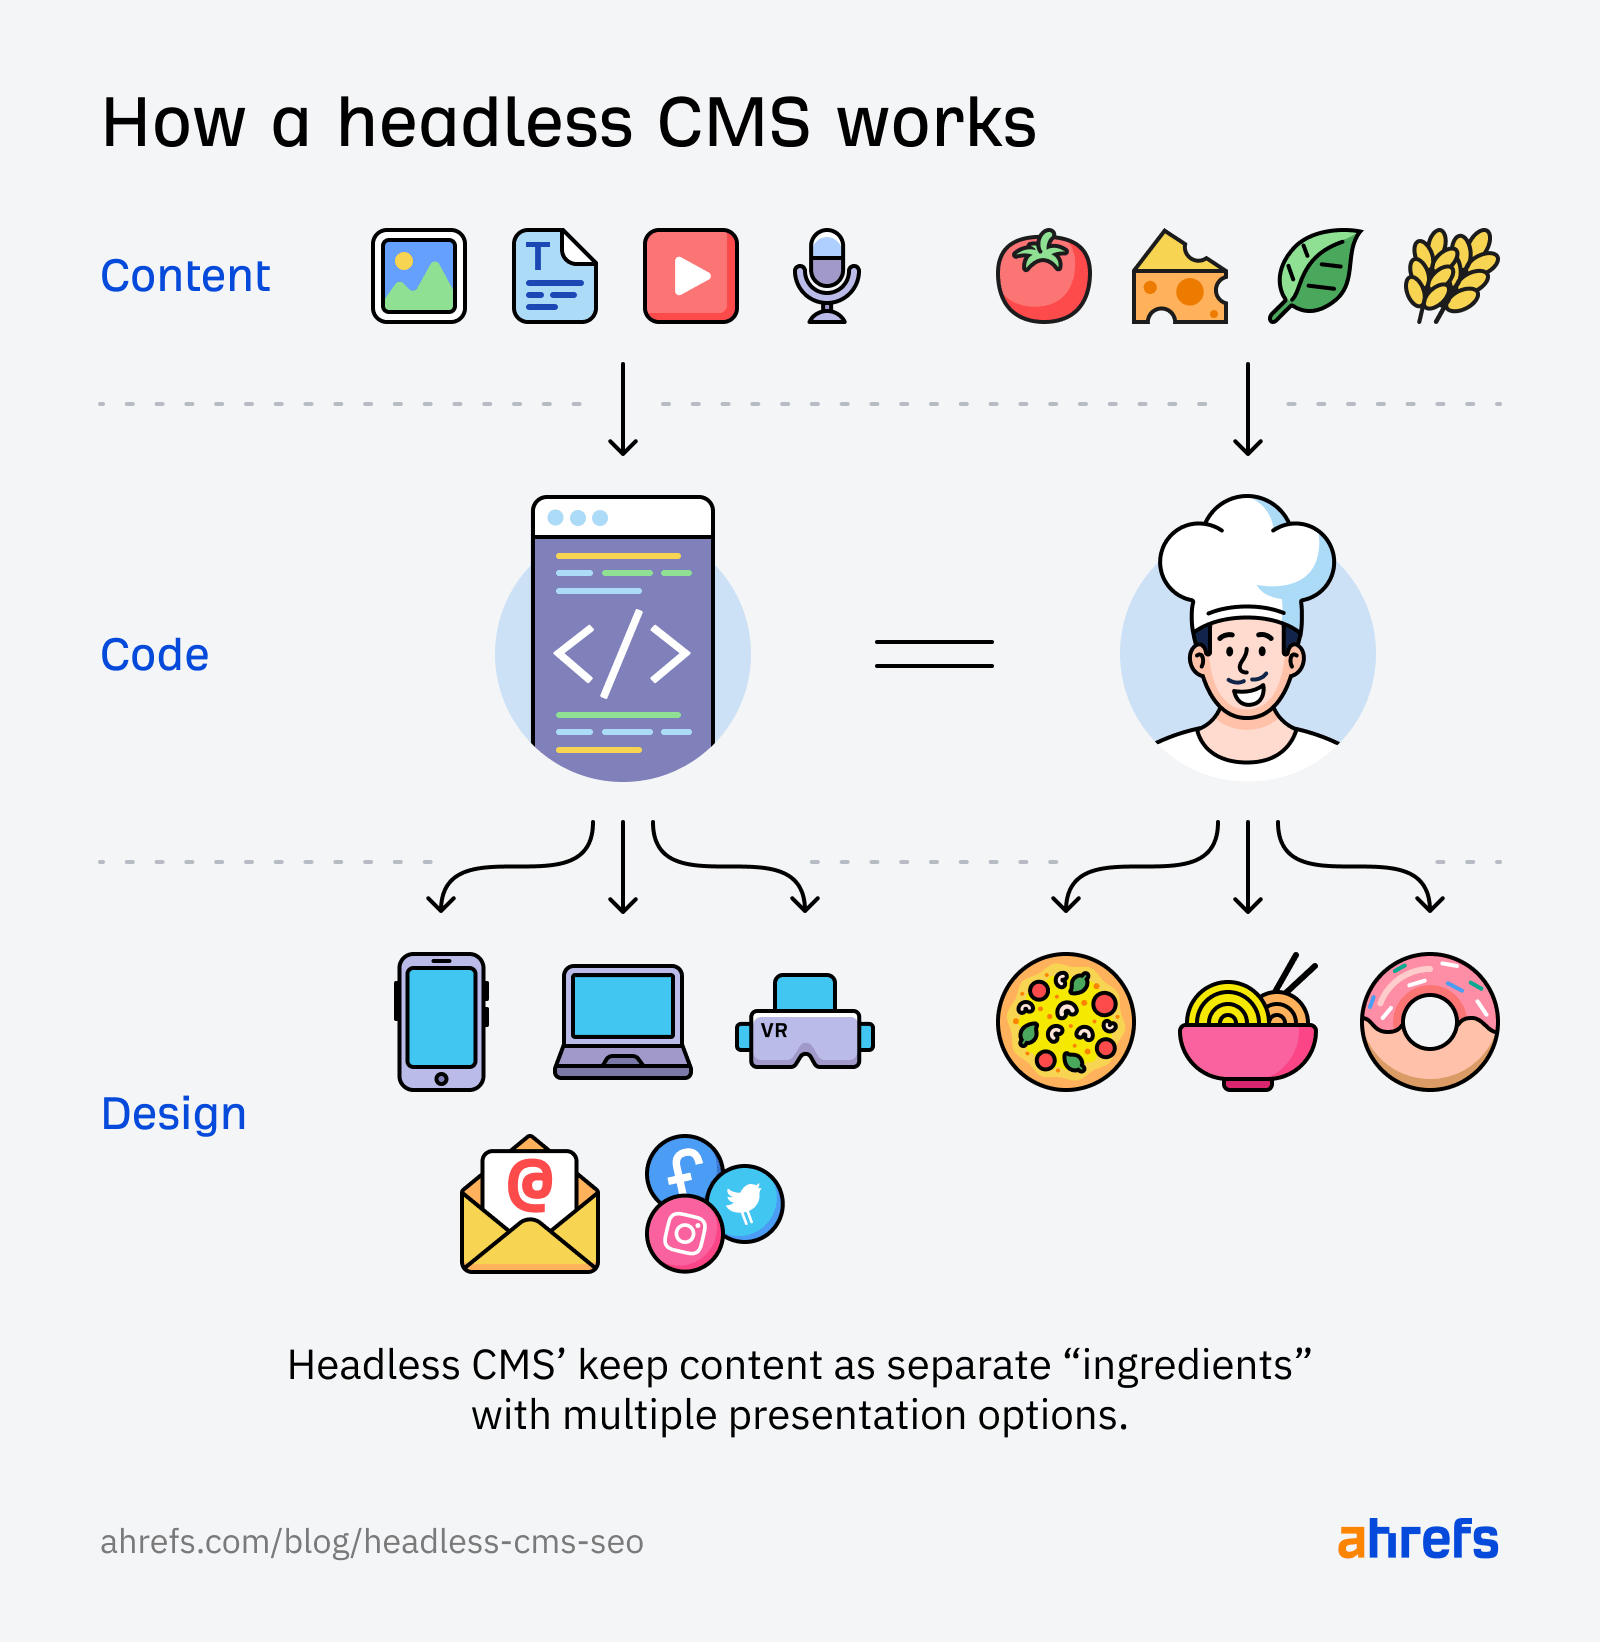 Example of how a headless CMS works